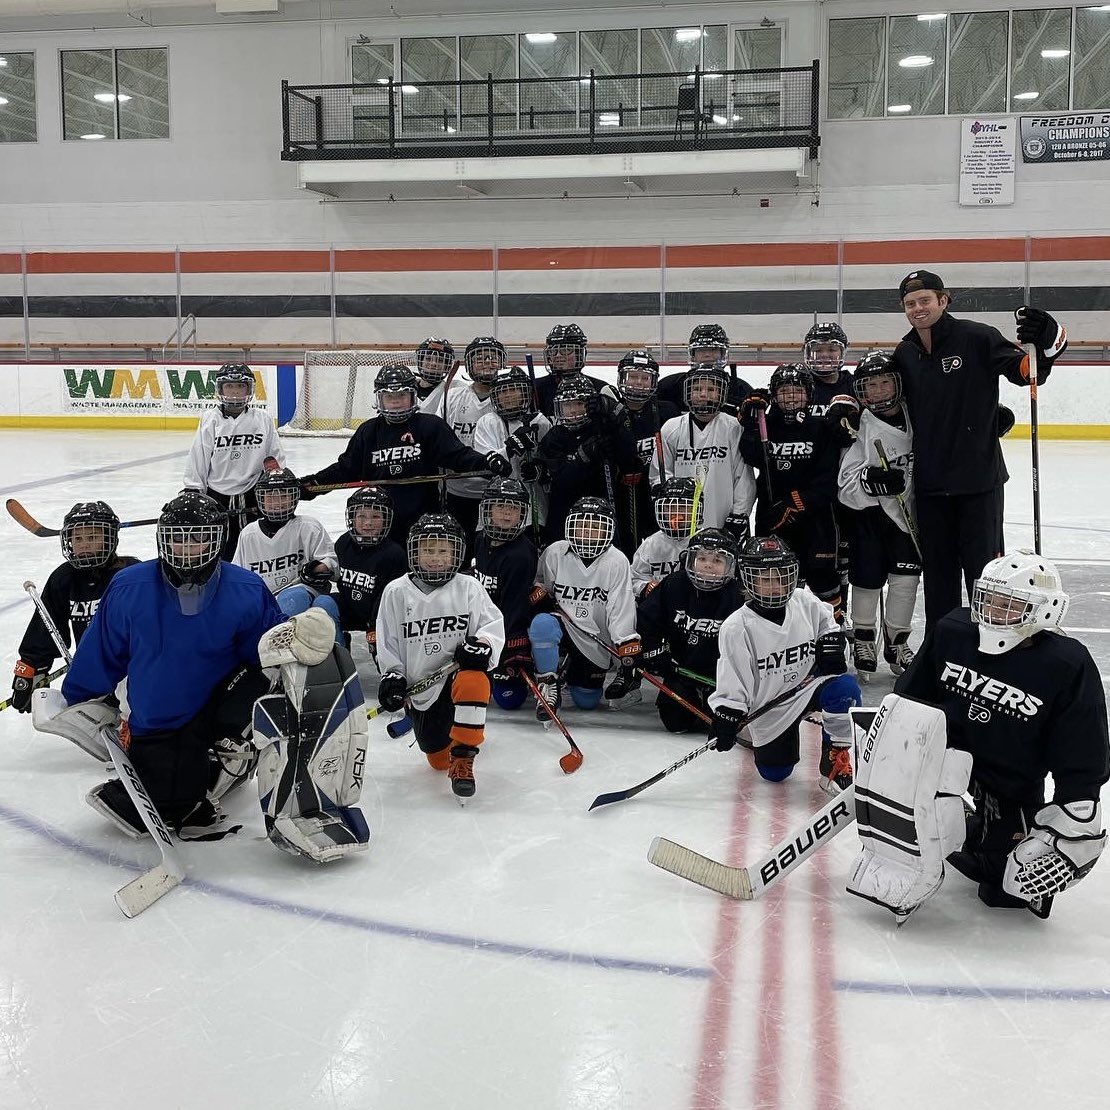 Learn from coaches with experience at the collegiate and NHL level at Flyers Hockey School! Previous camps have featured appearances from Cam York and Rocky Thompson. This year, Scott Hartnell will join camp as a guest coach! Learn more at: bit.ly/37JjeH8